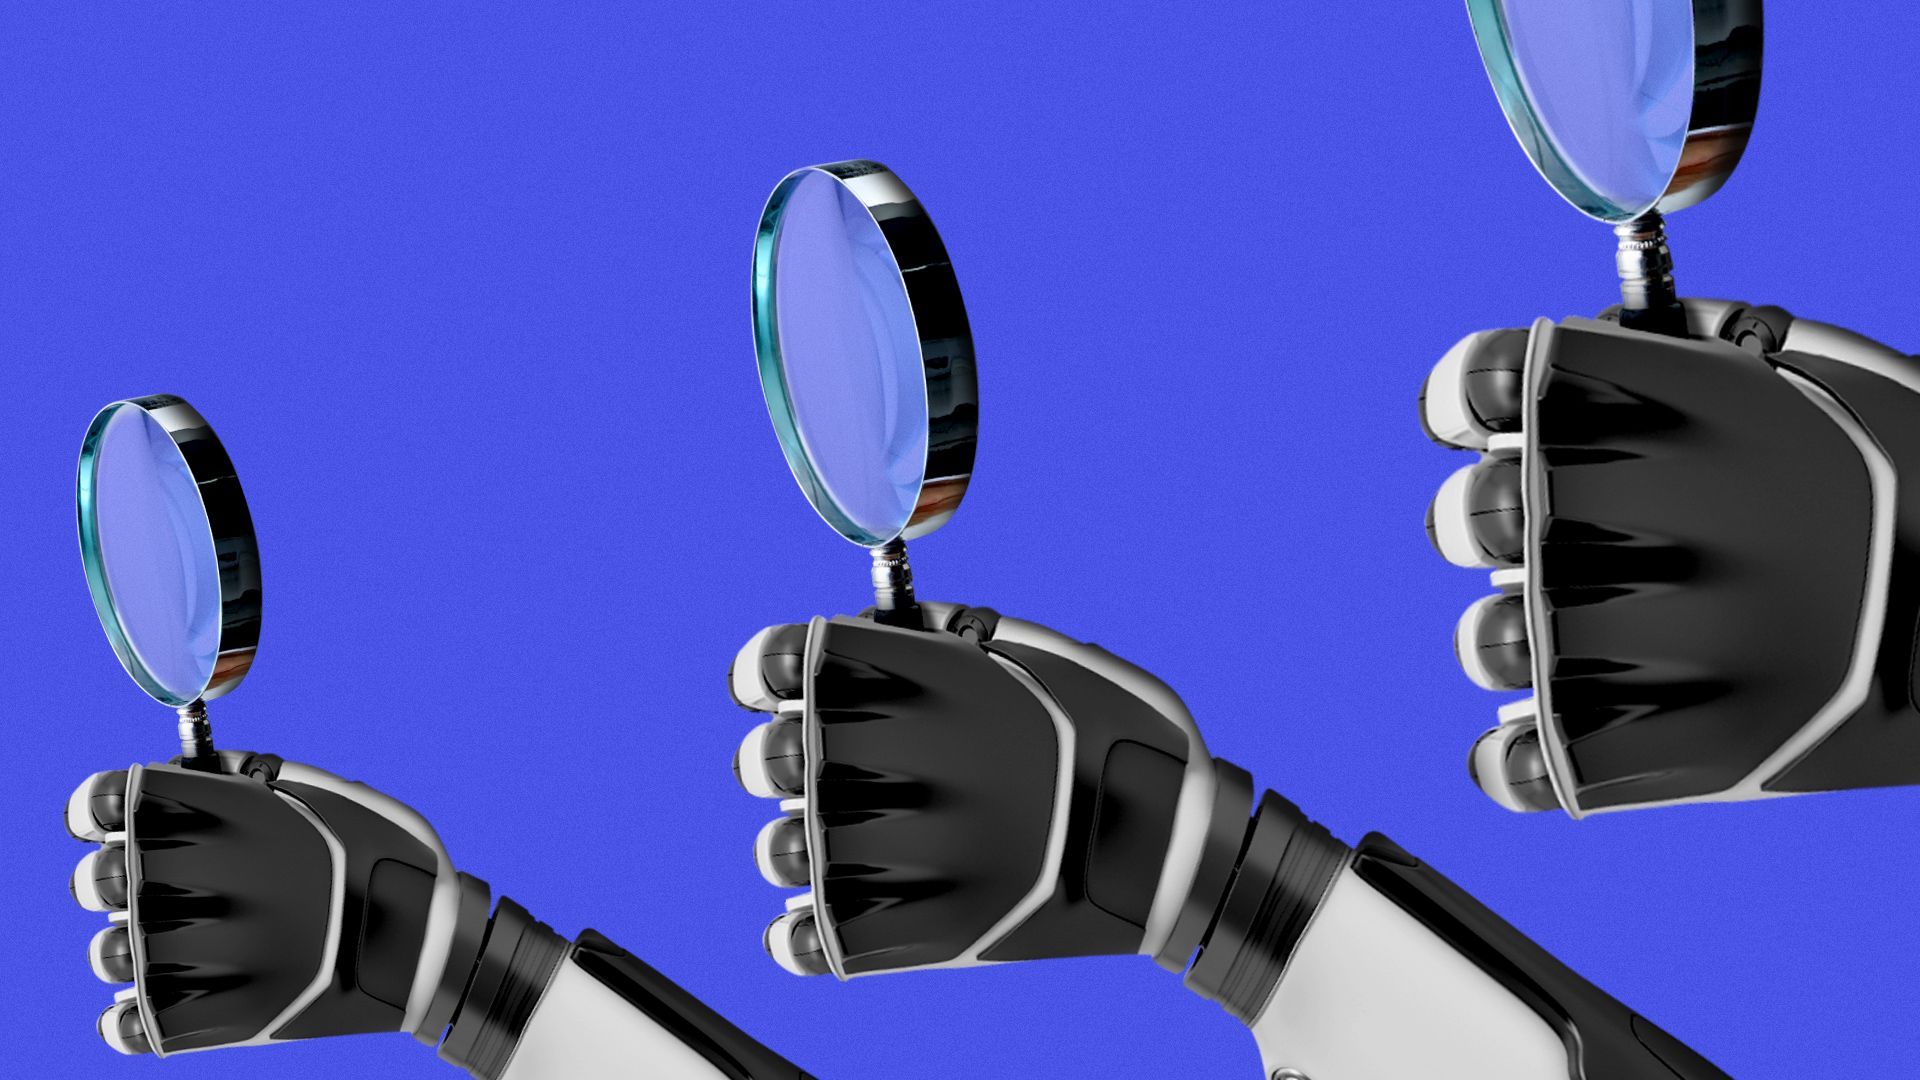 Illustration of a repeating pattern of robot hands holding magnifying glasses.